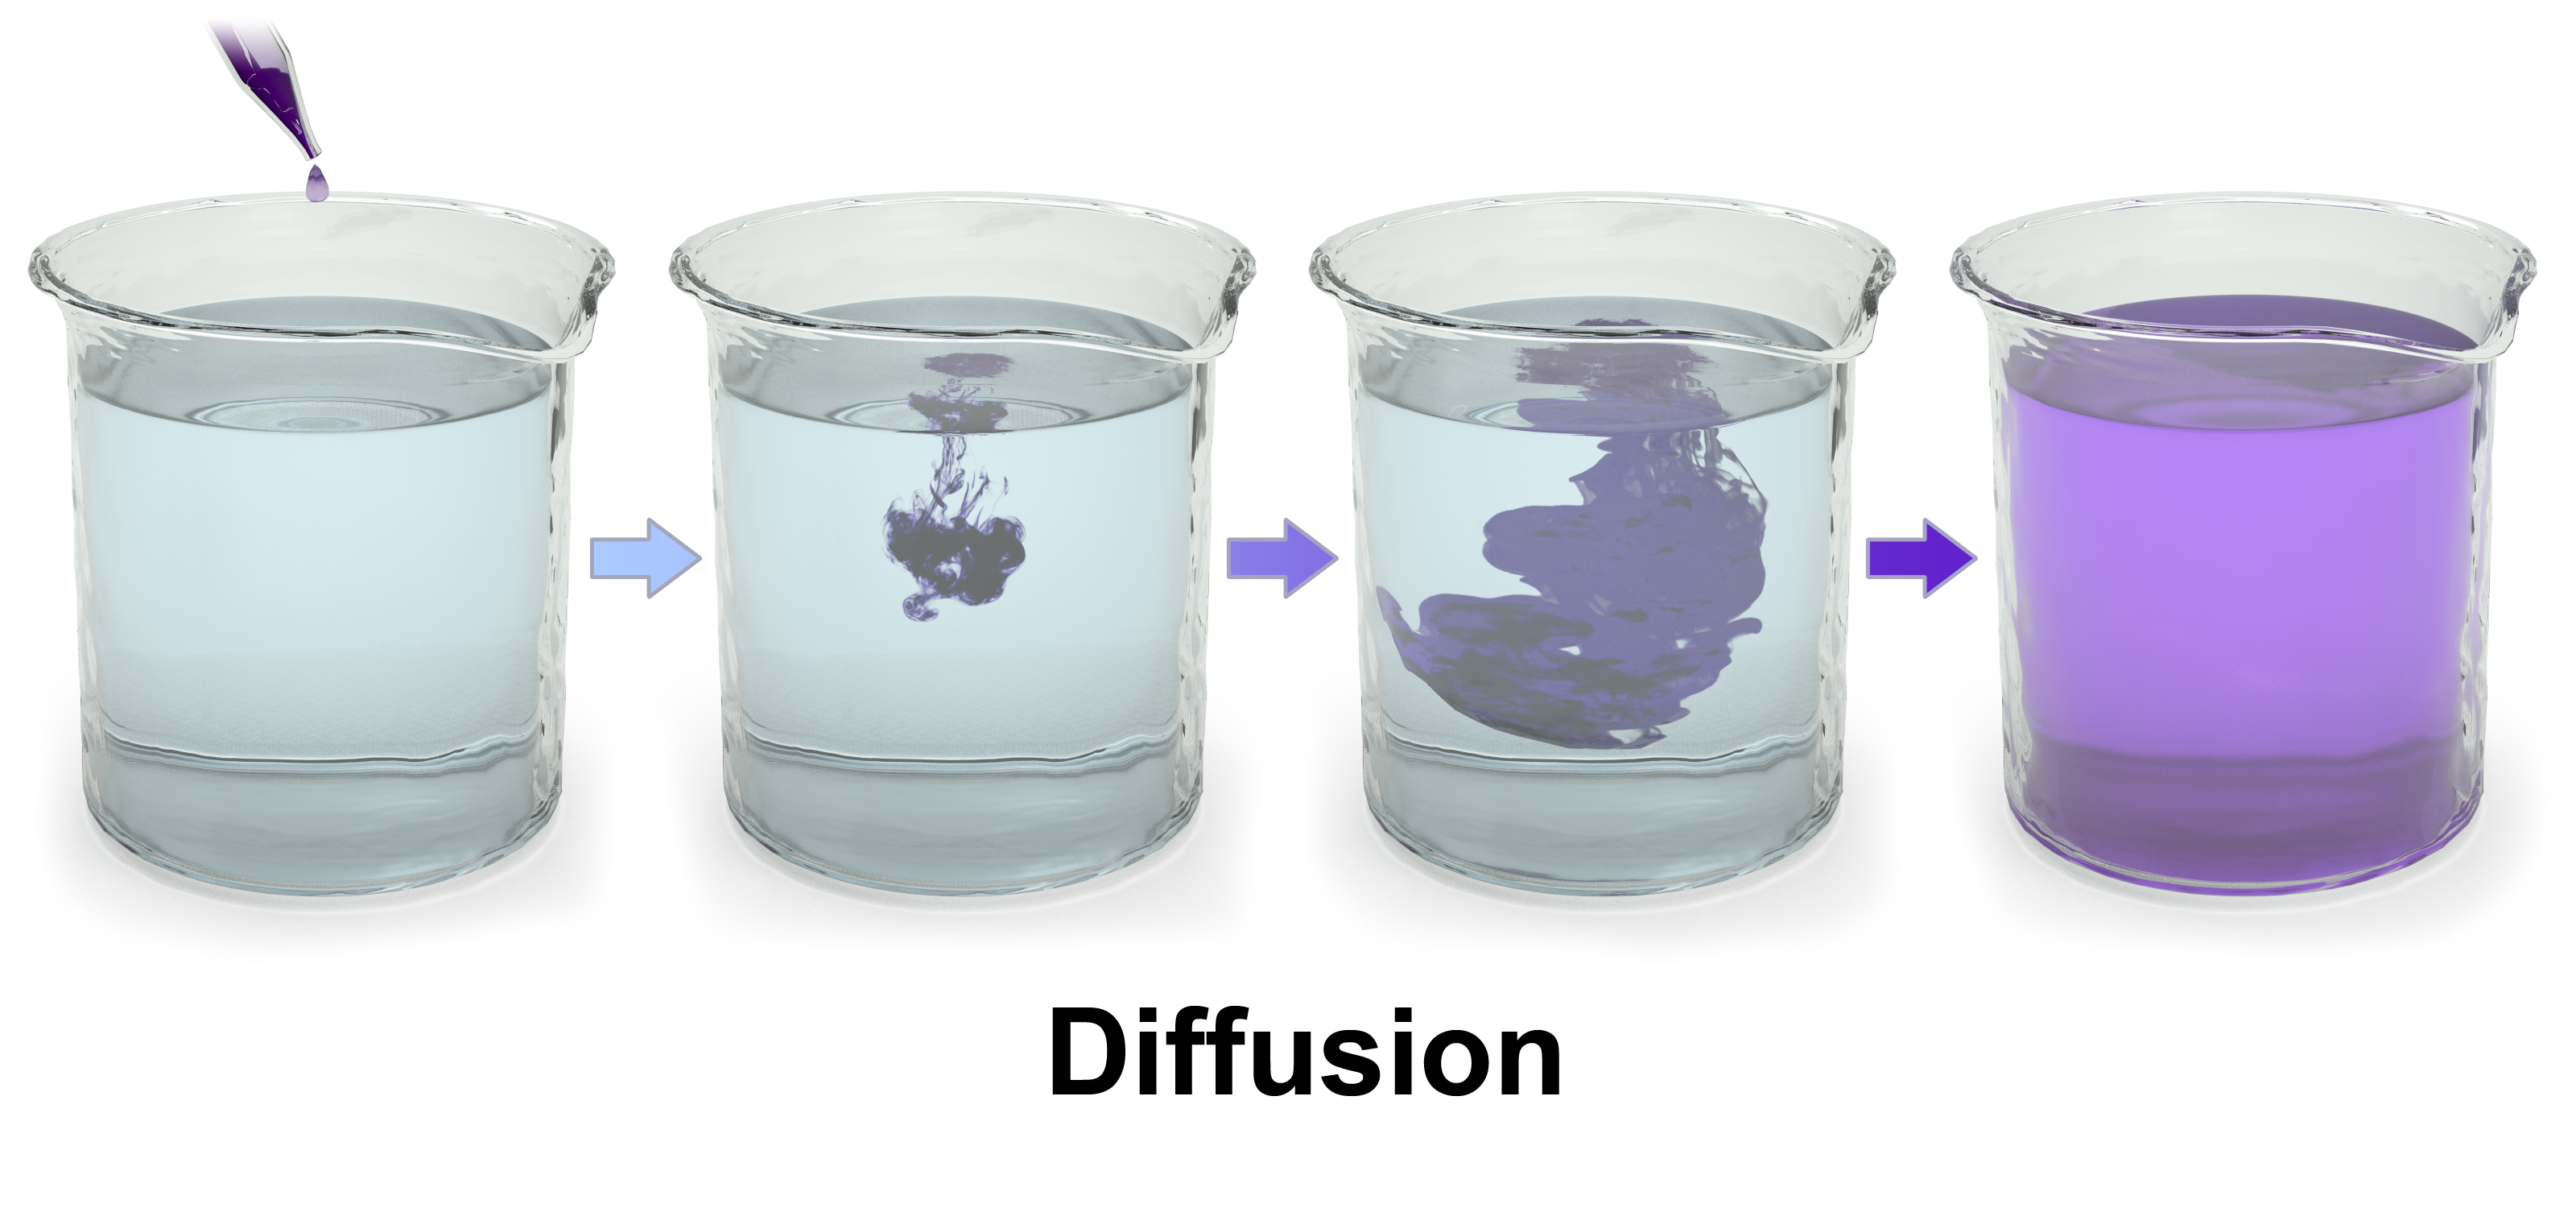 Figure illustrating how colour diffuses into a glass of liquid.